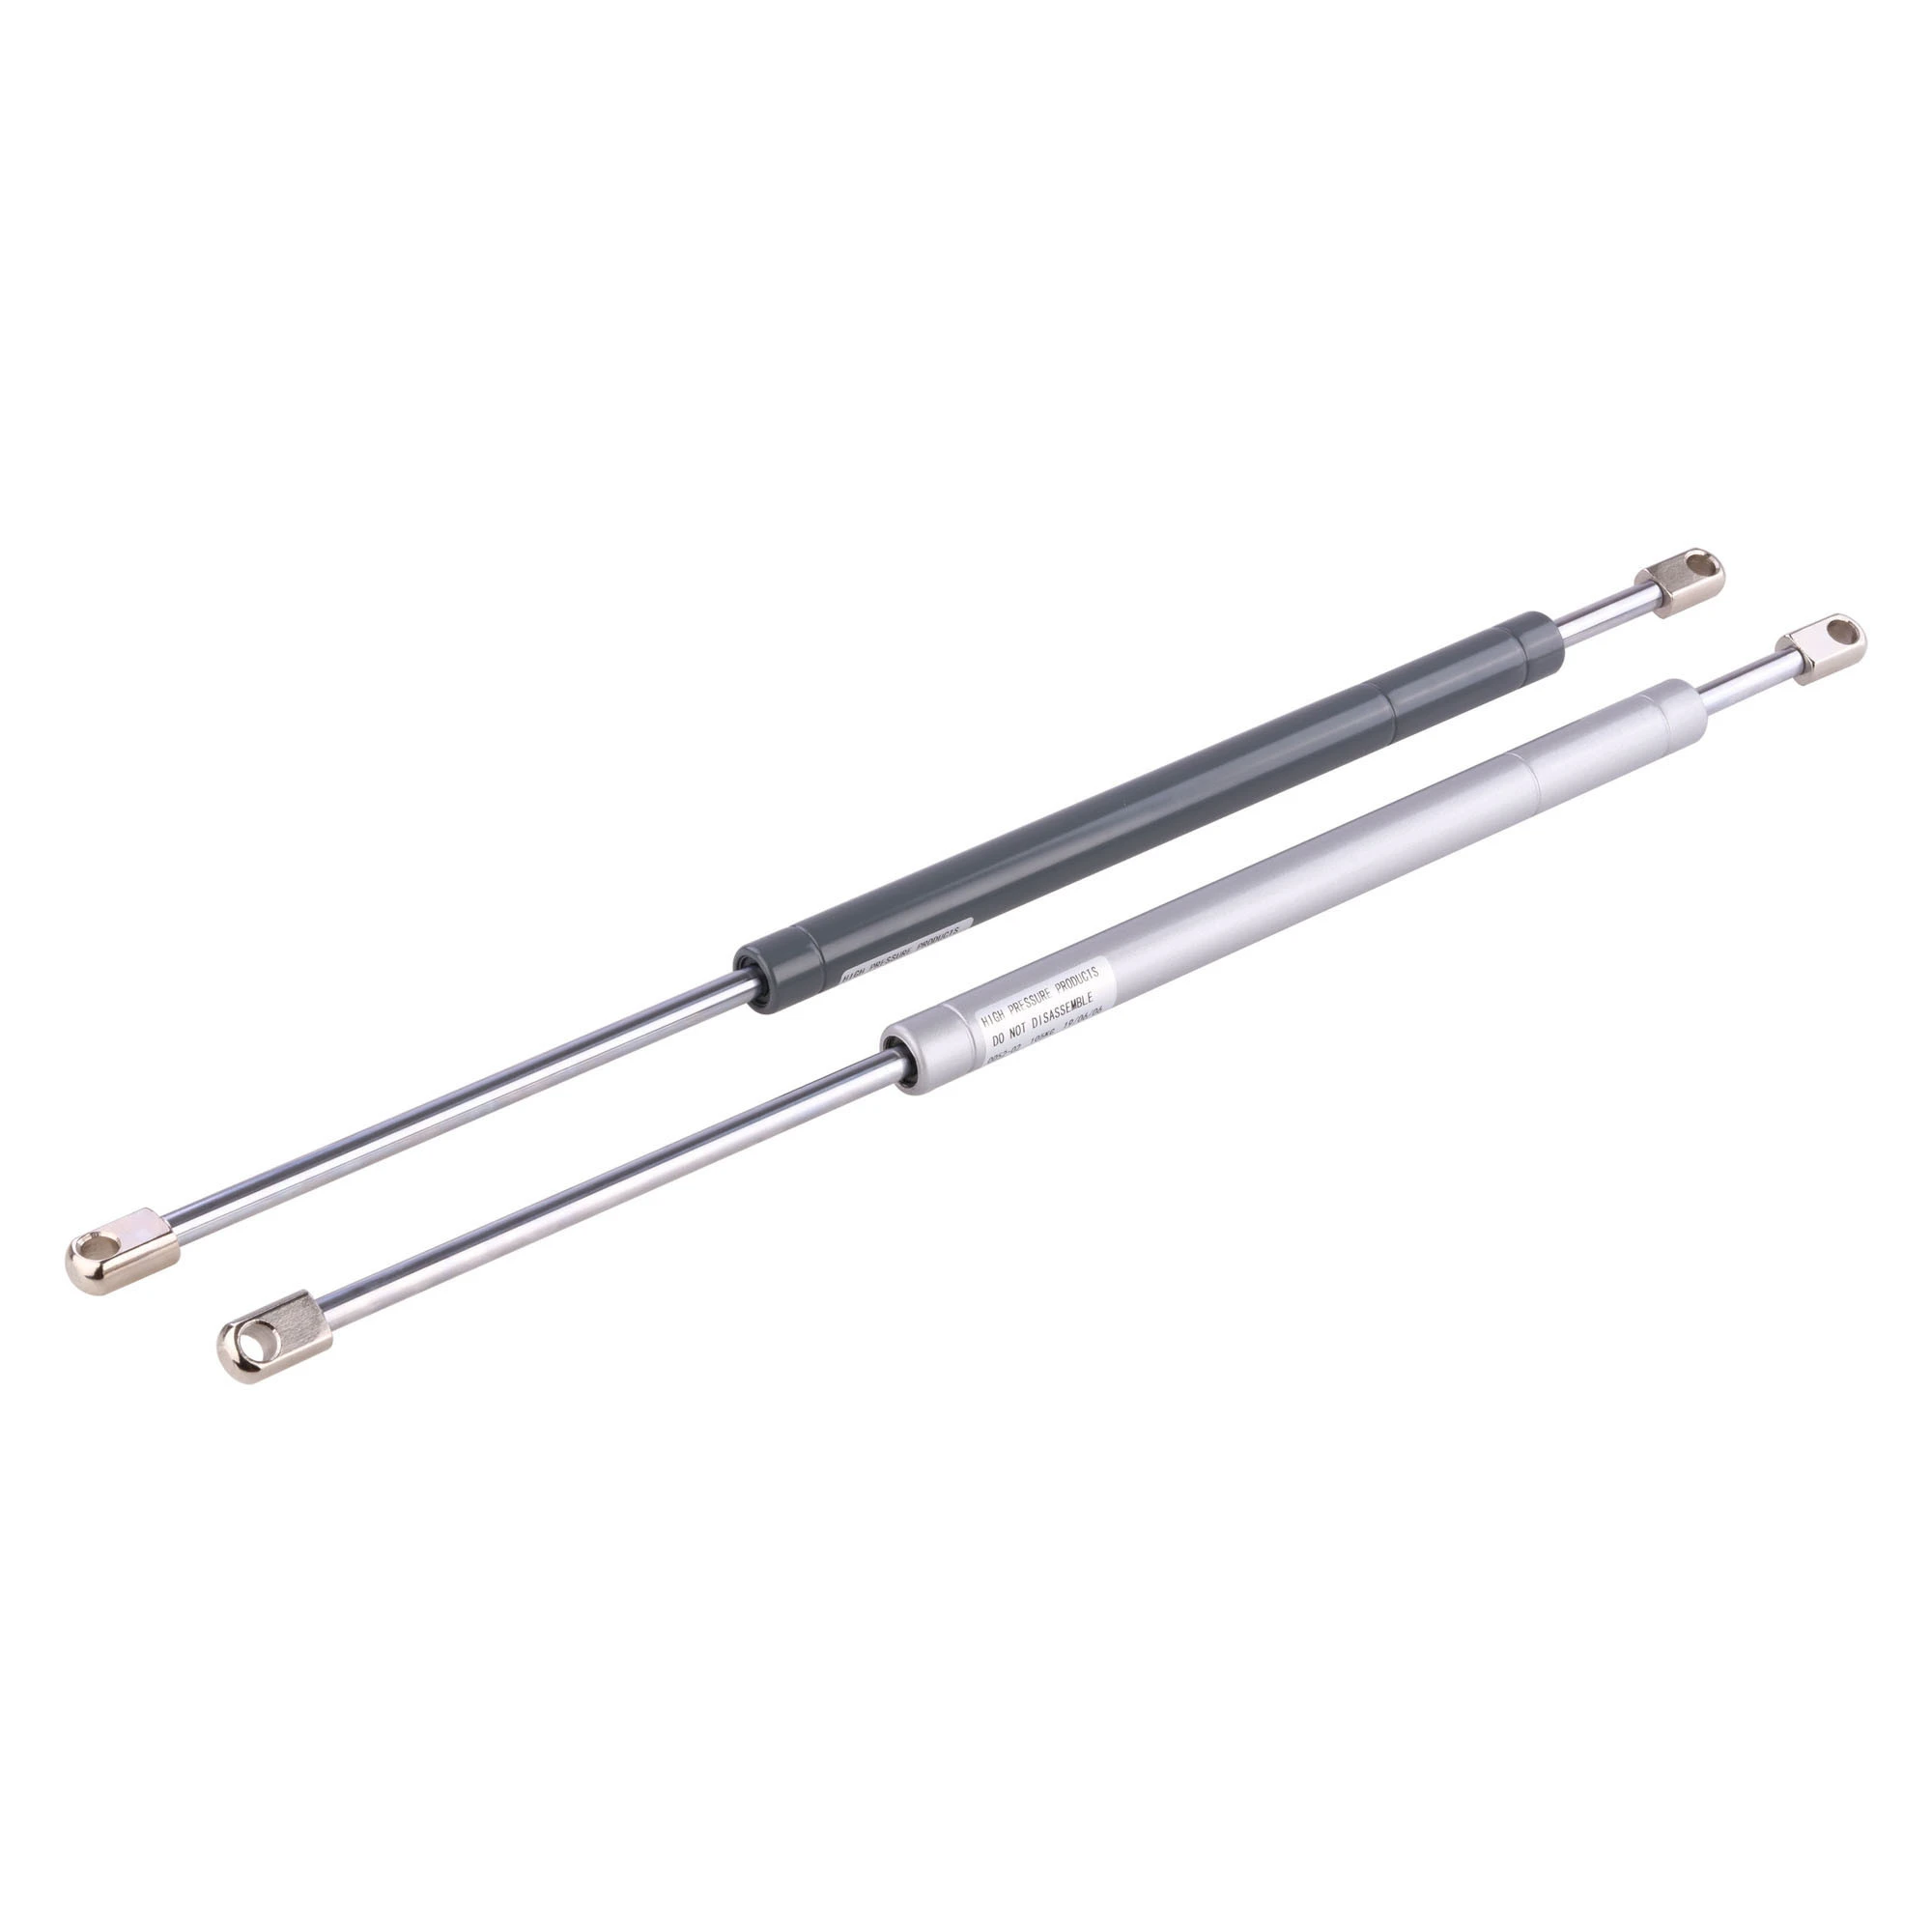 100N - 1000N furniture hardware gas spring for wall bed